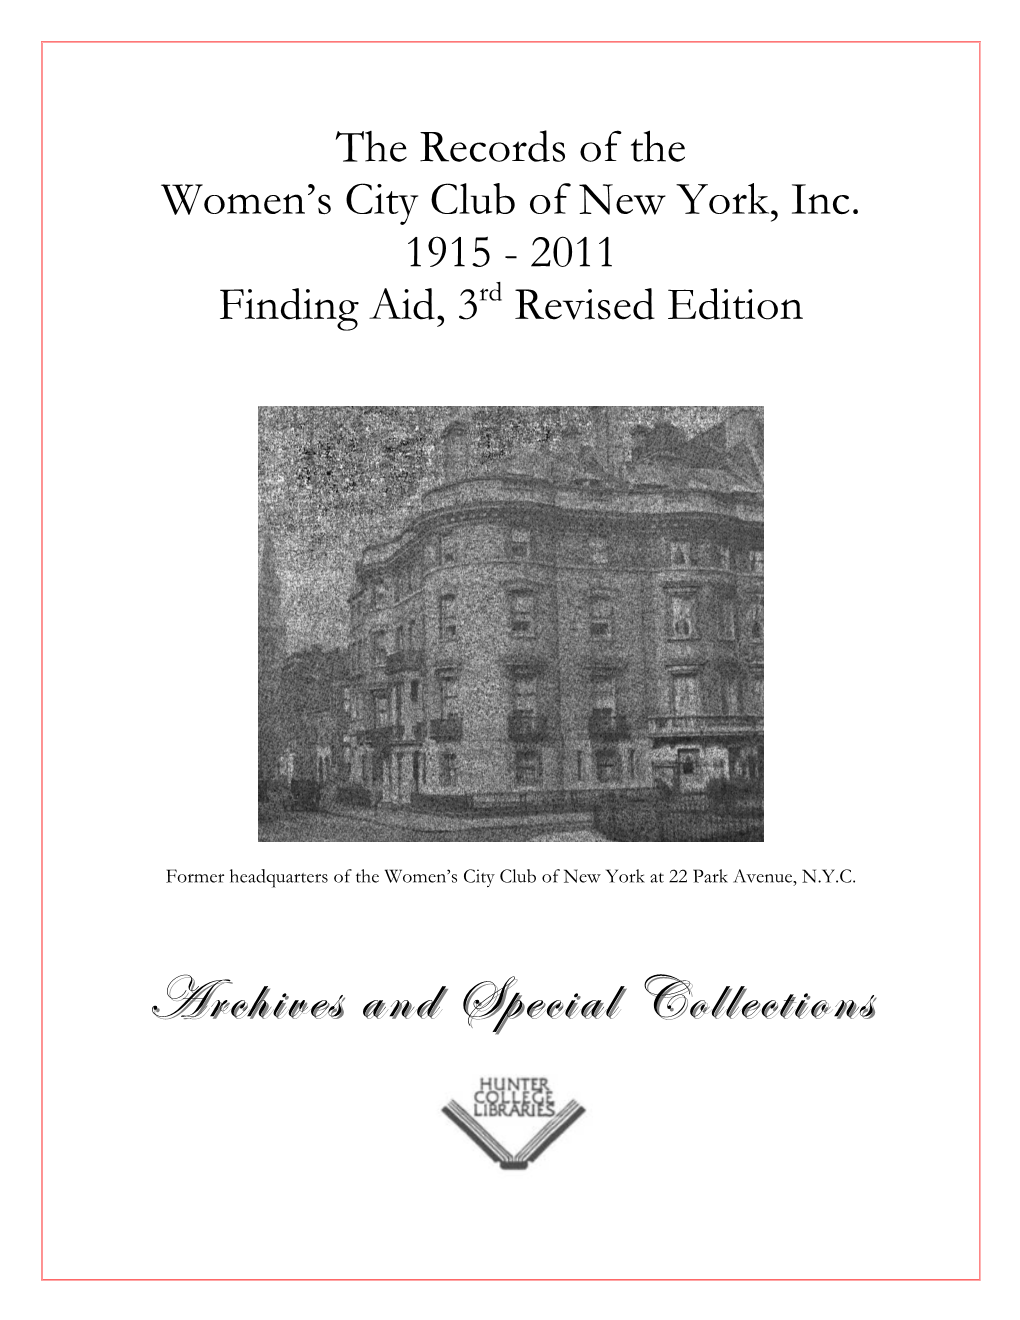 The Records of the Women's City Club of New York, Inc. 1915